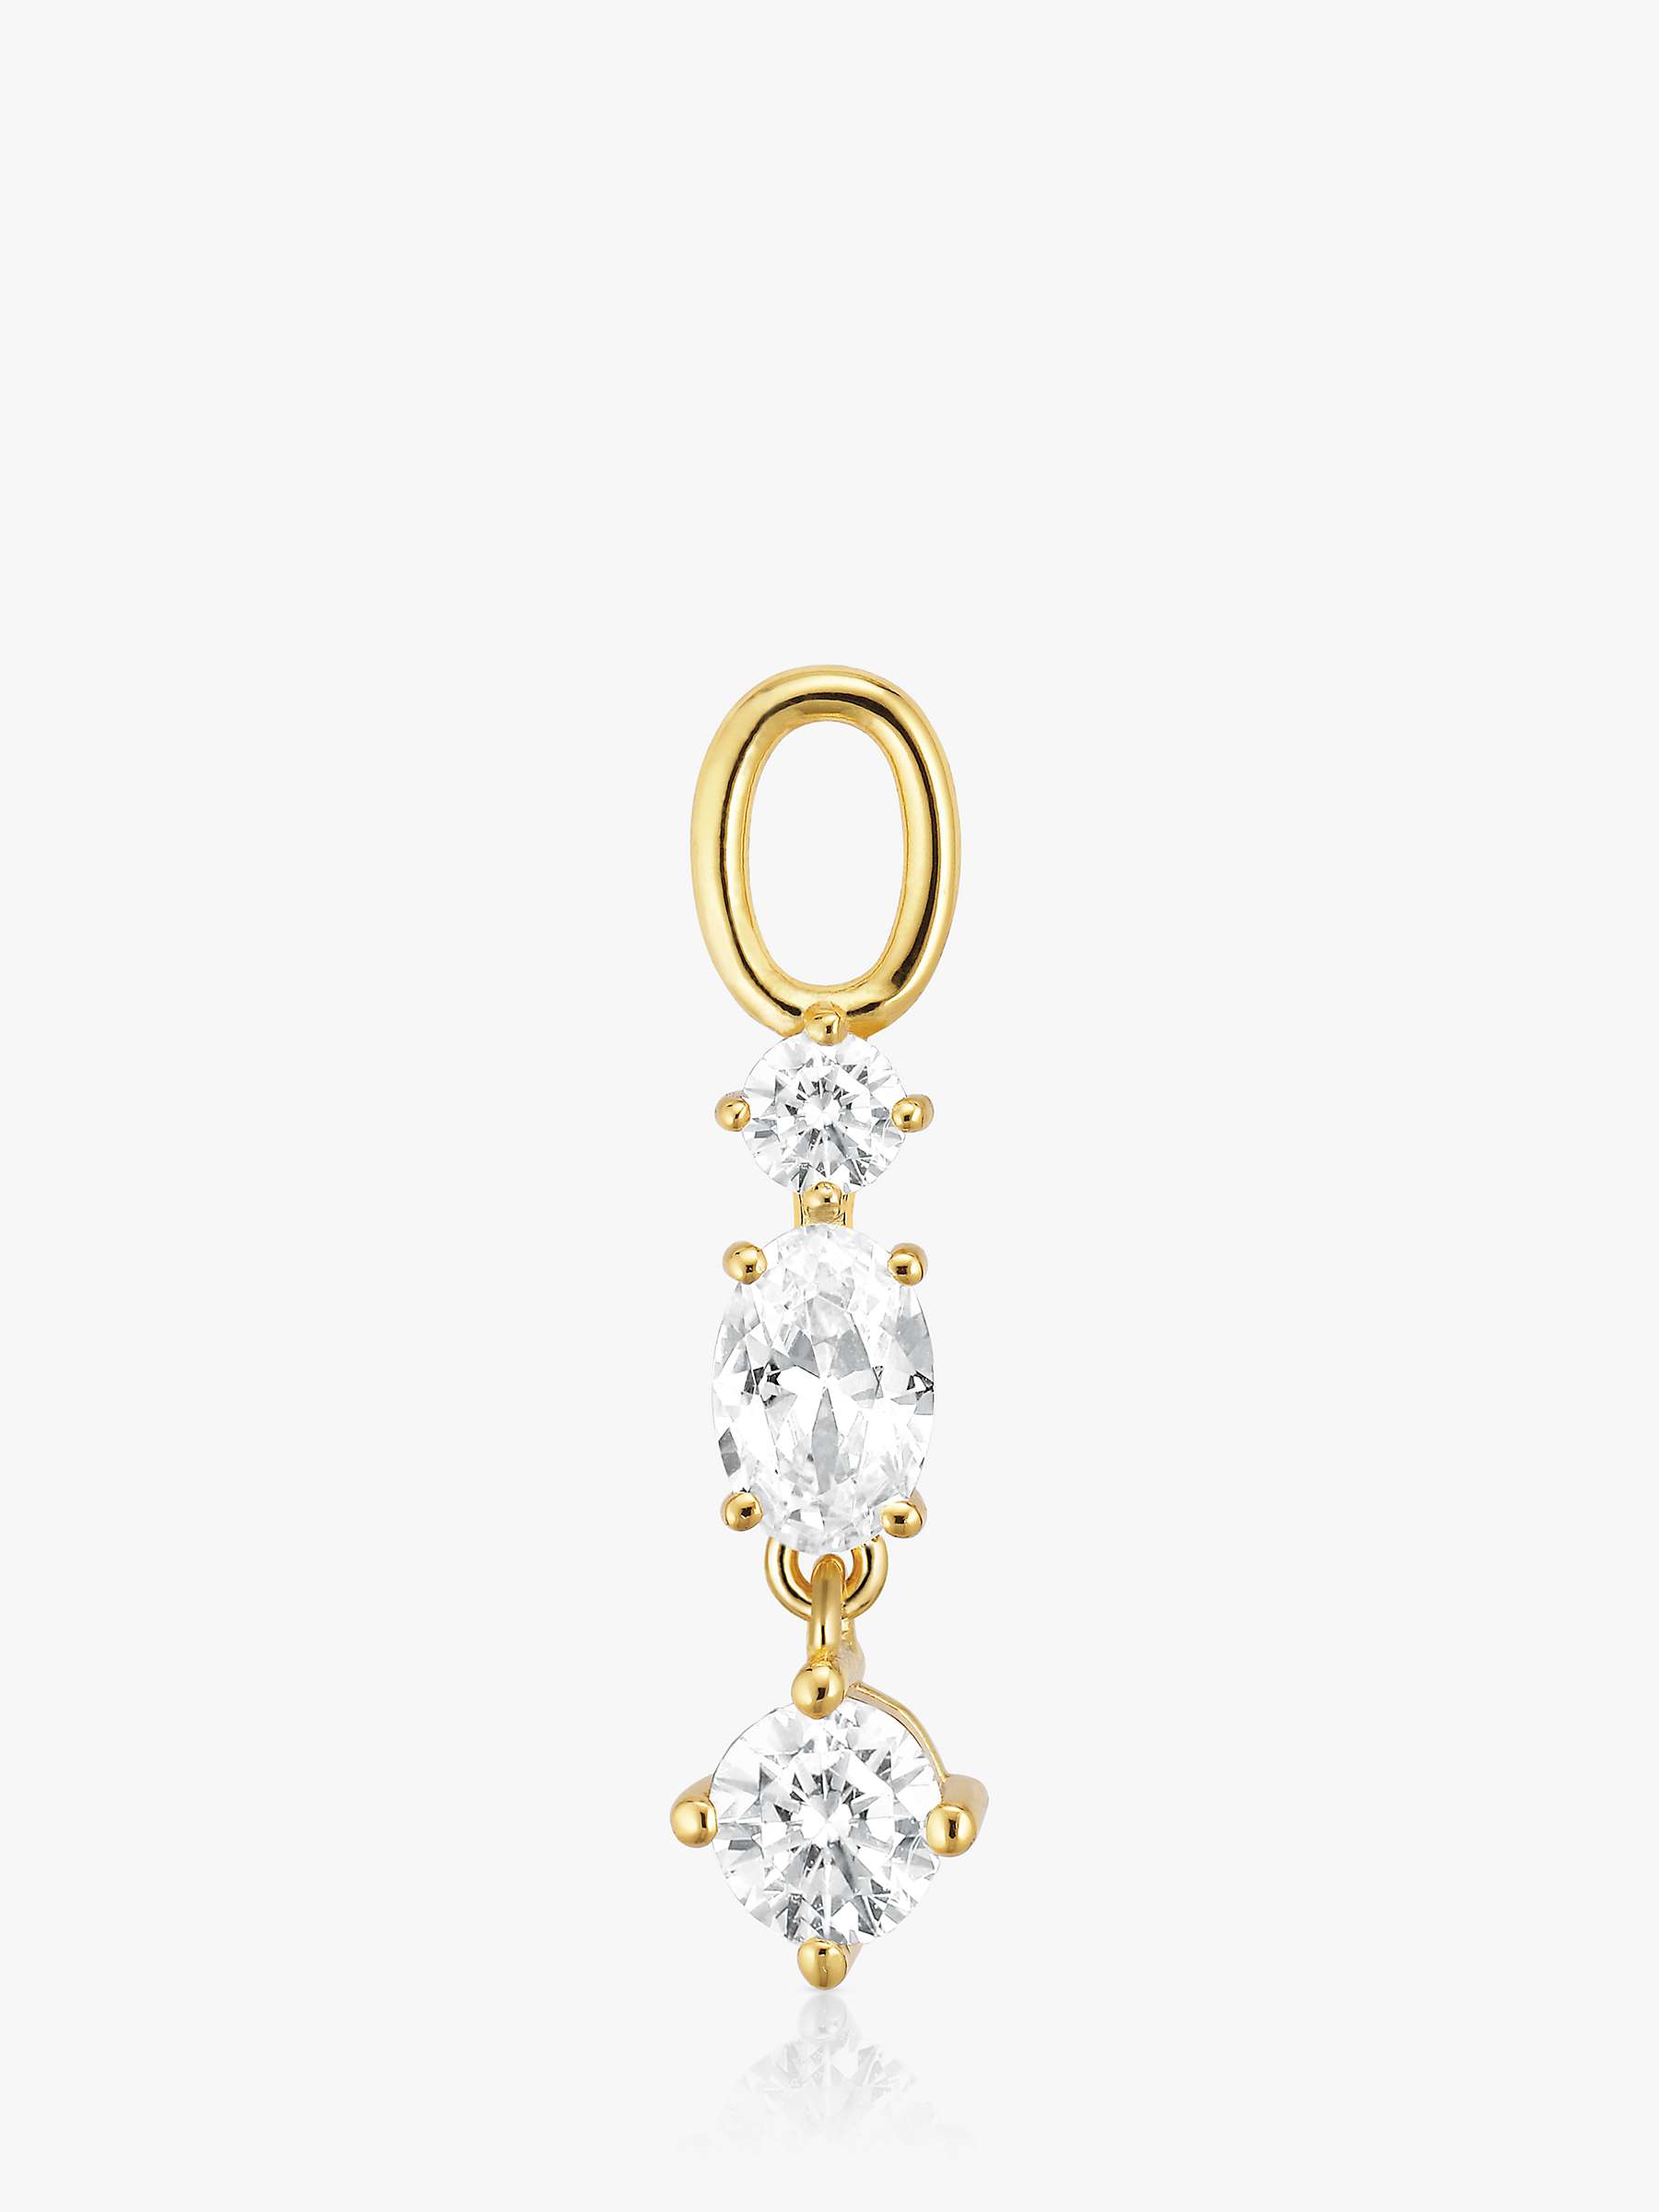 Buy Sif Jakobs Jewellery White Zirconia Charm, Gold Online at johnlewis.com